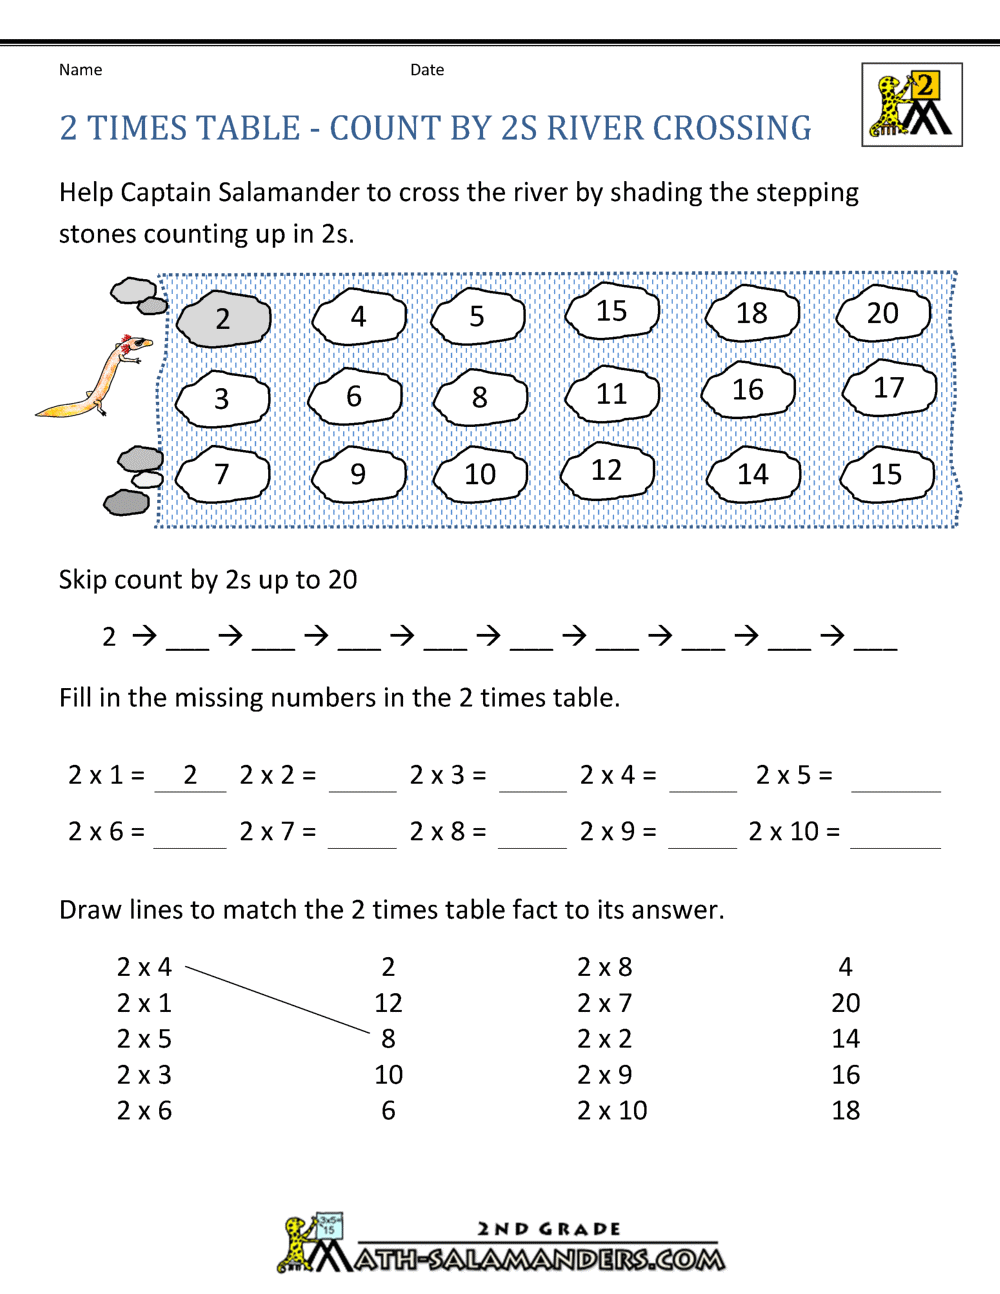 11 Times Table For 2 Times Table Worksheet